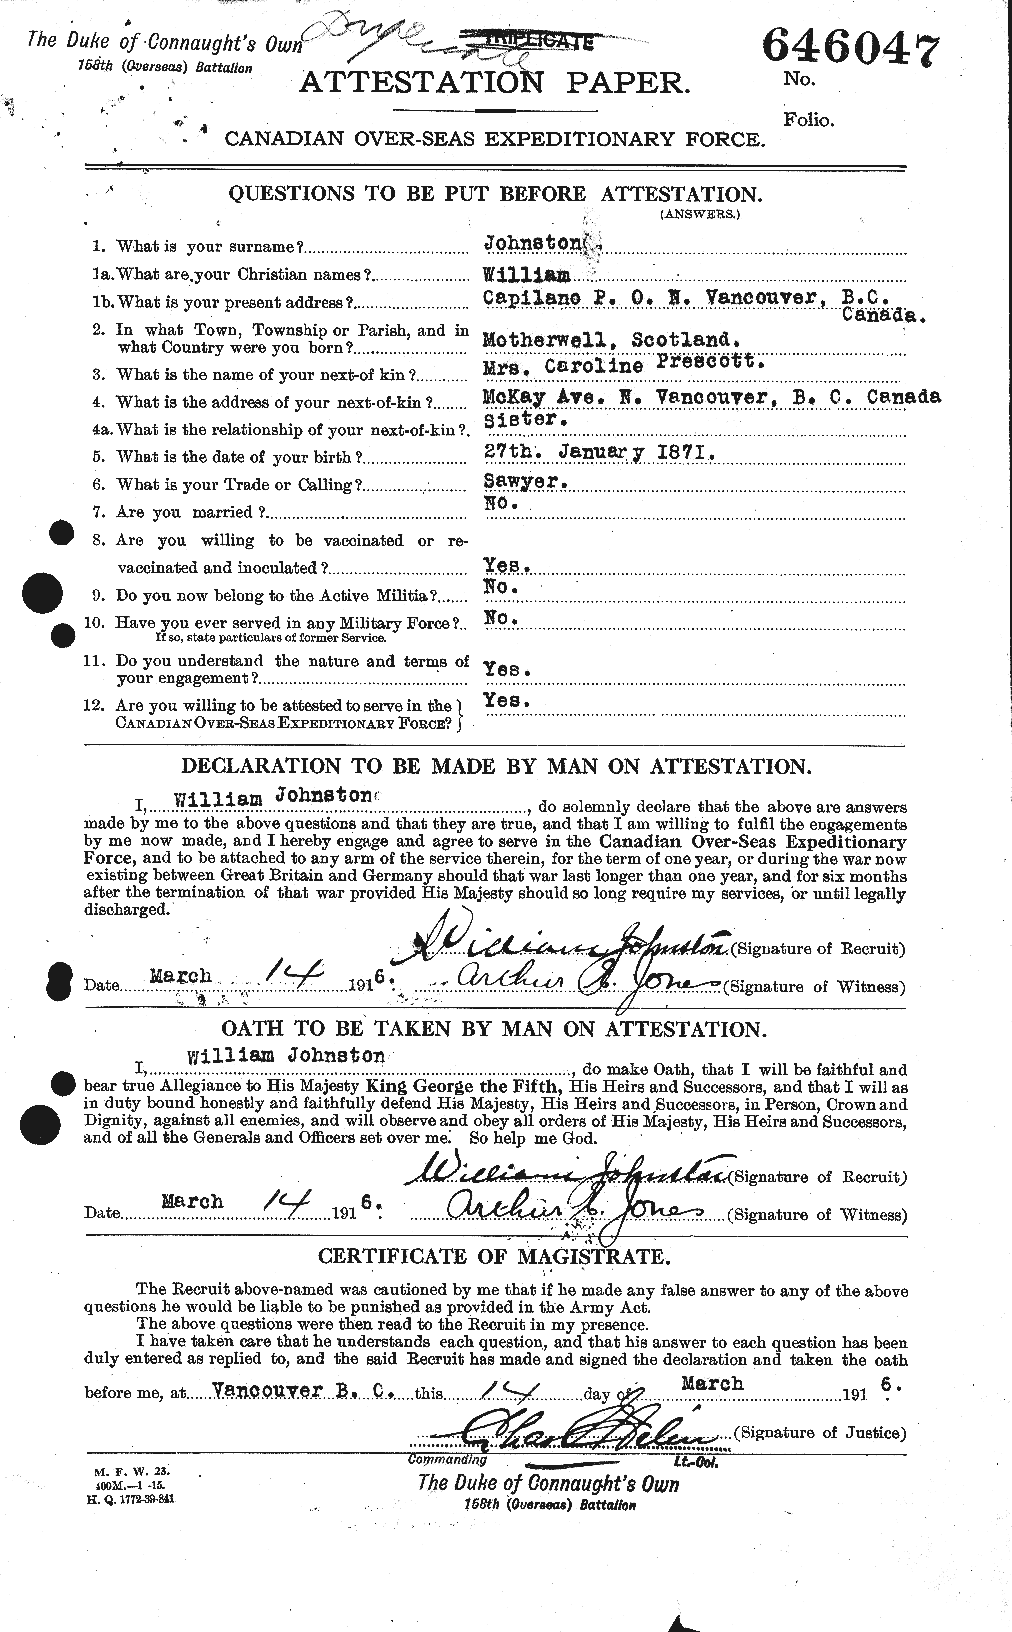 Personnel Records of the First World War - CEF 427249a